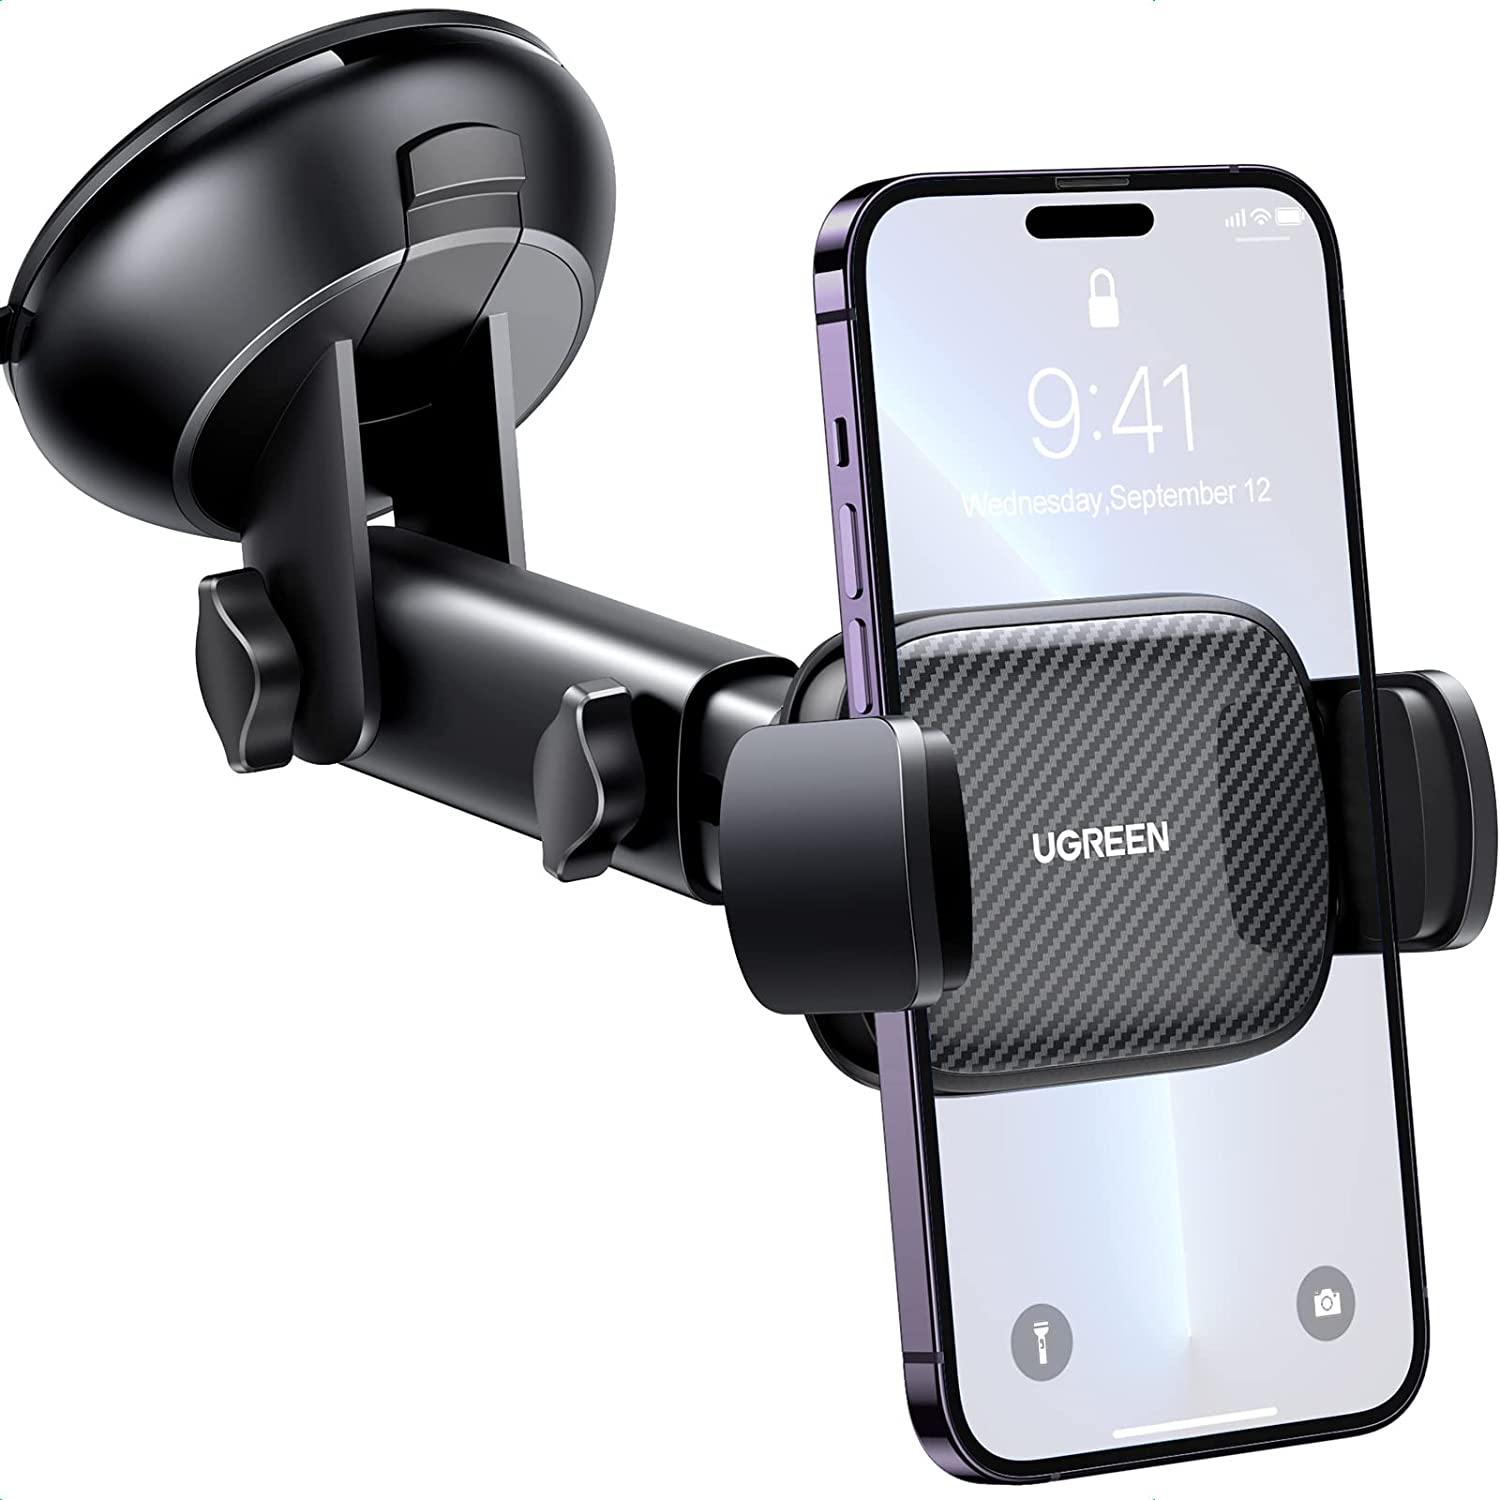 UGREEN Car Phone Holder Mount Suction Cup Windshield [...]